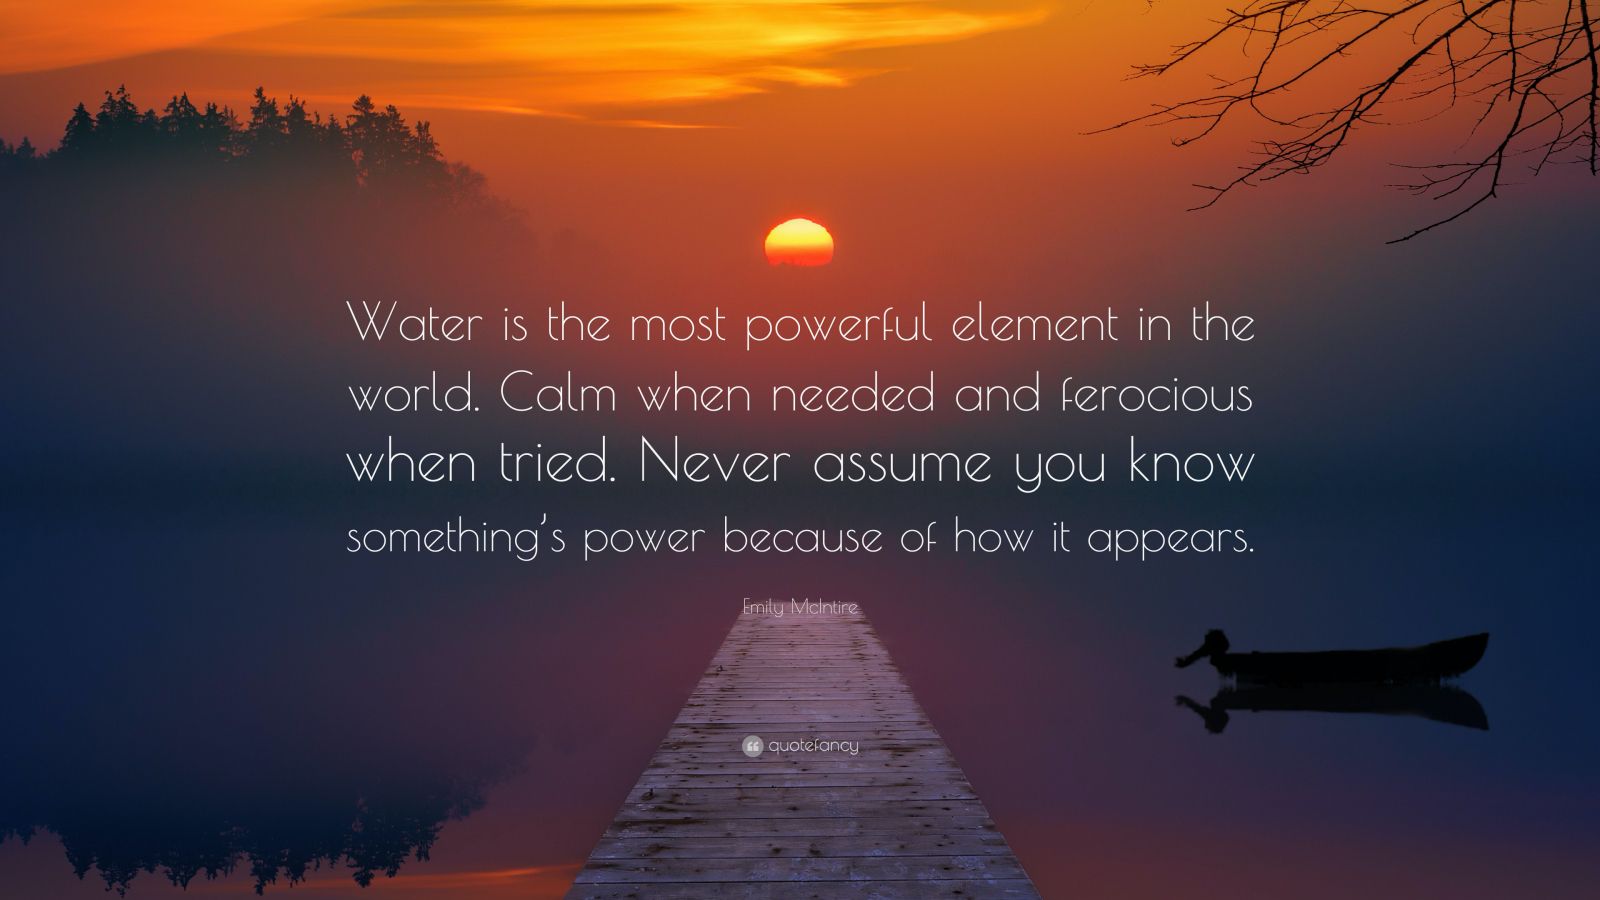 Emily McIntire Quote: “Water is the most powerful element in the world ...